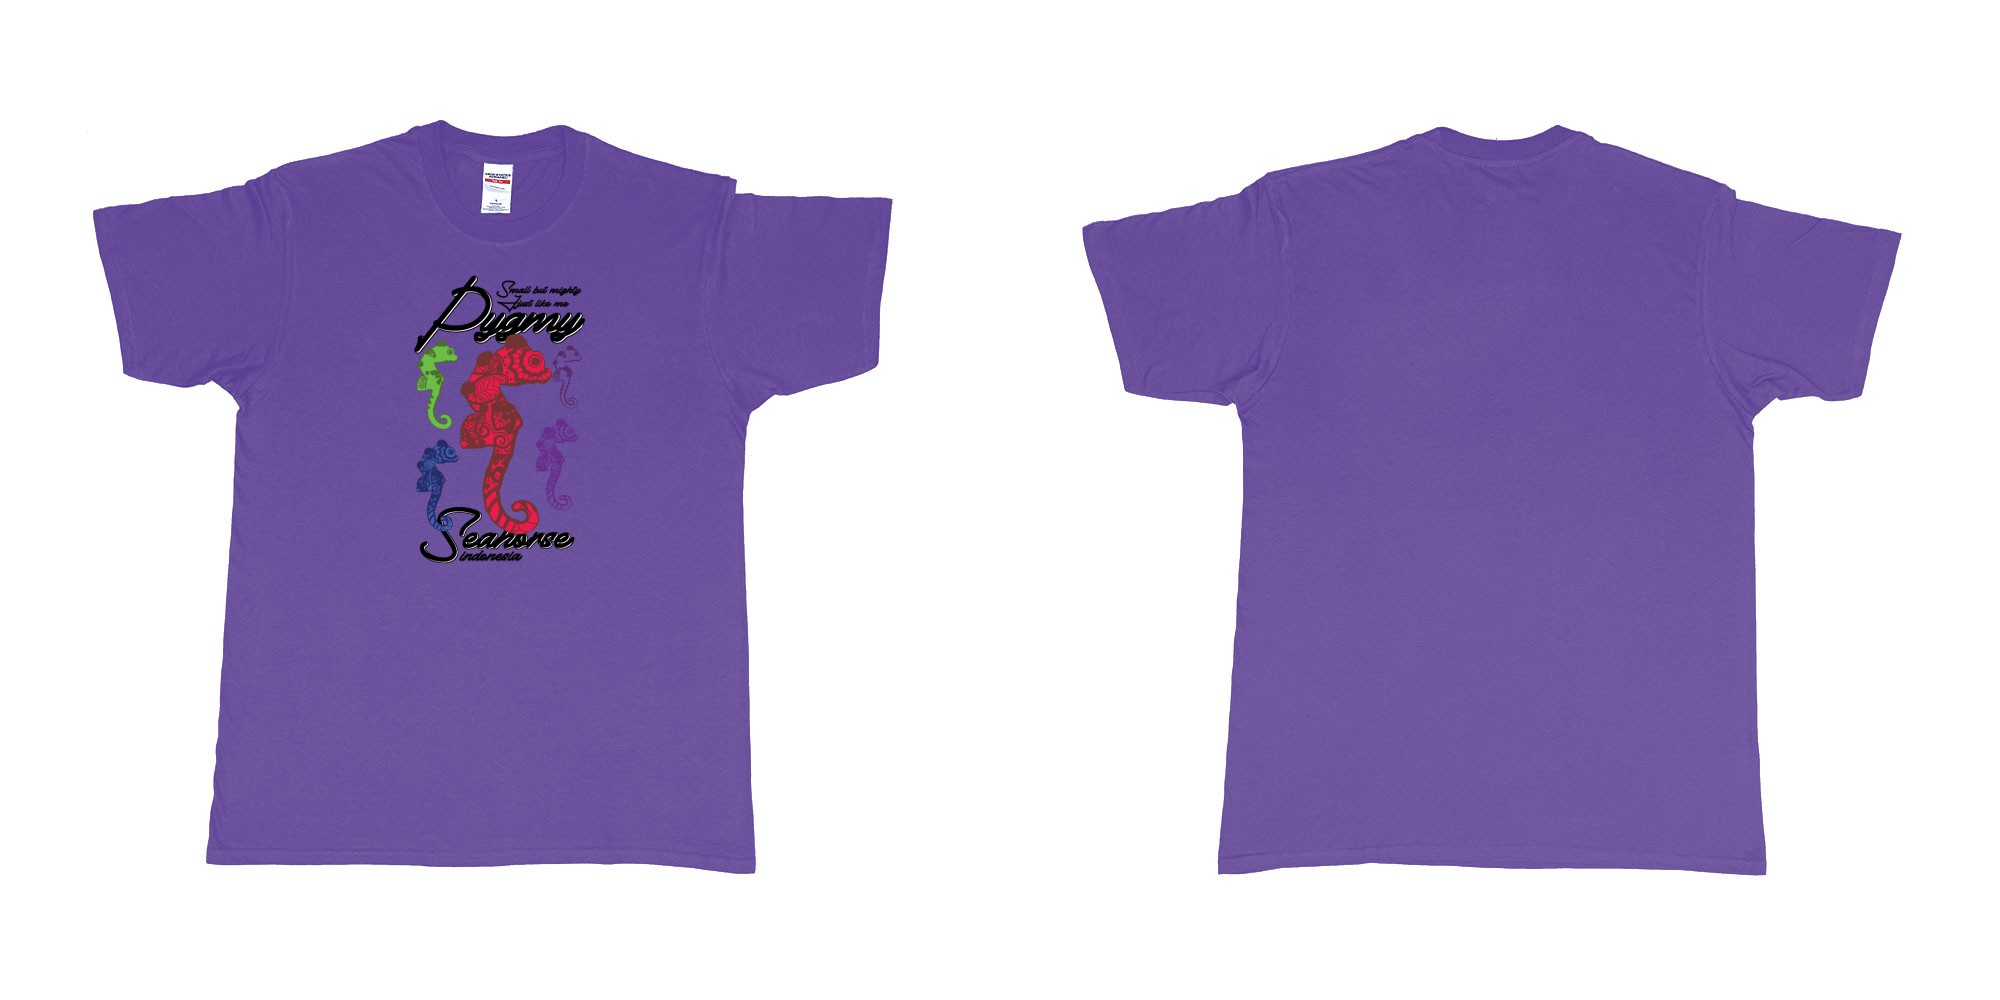 Custom tshirt design pygmy seahorse indonesia small but mighty just like me in fabric color purple choice your own text made in Bali by The Pirate Way